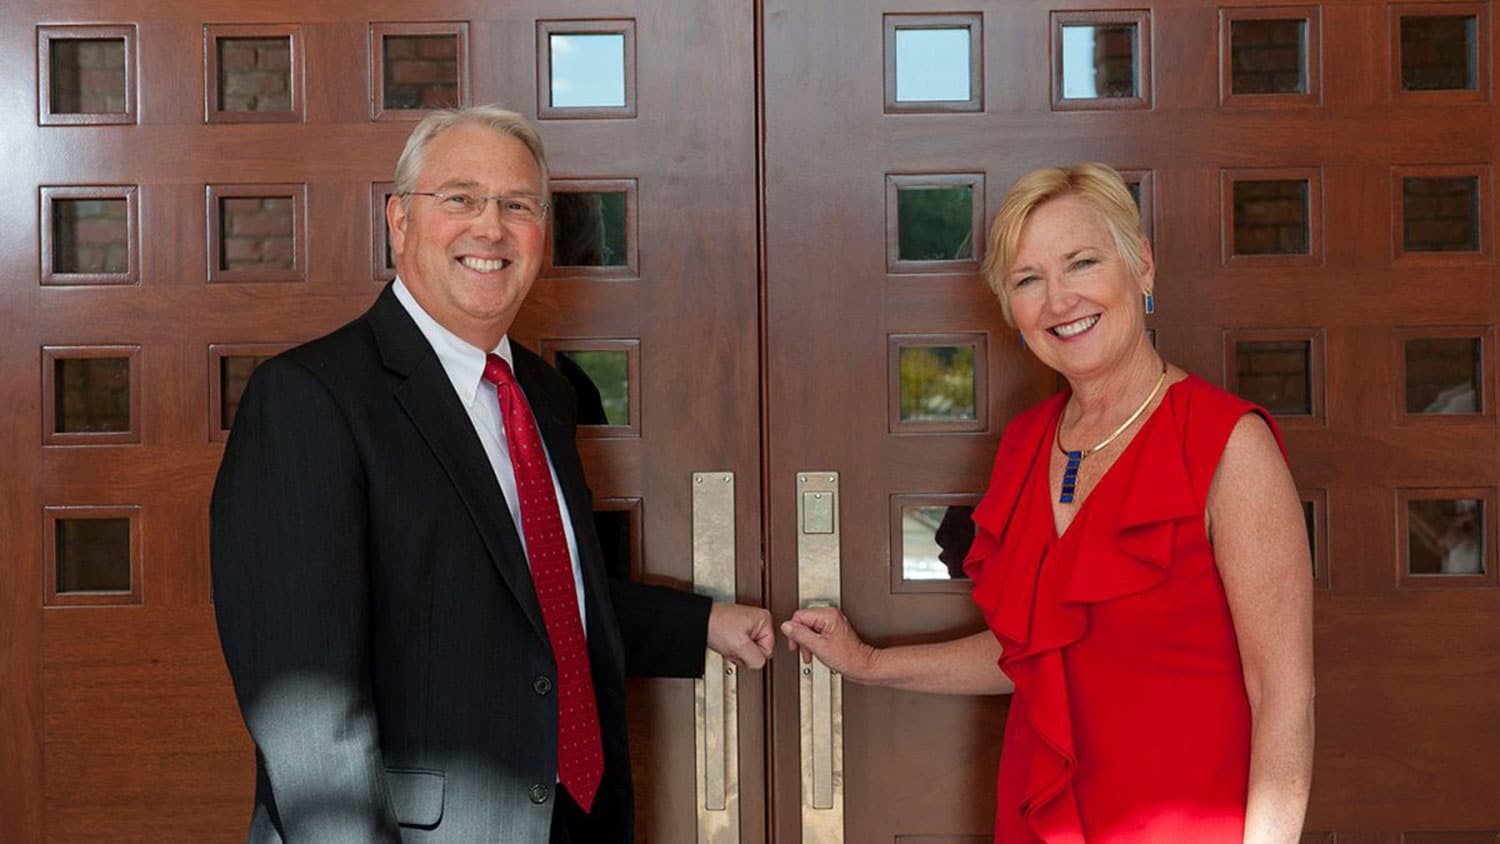 NC State Chancellor Randy Woodson and his wife Susan Woodson at the front doors of their residence, The Point